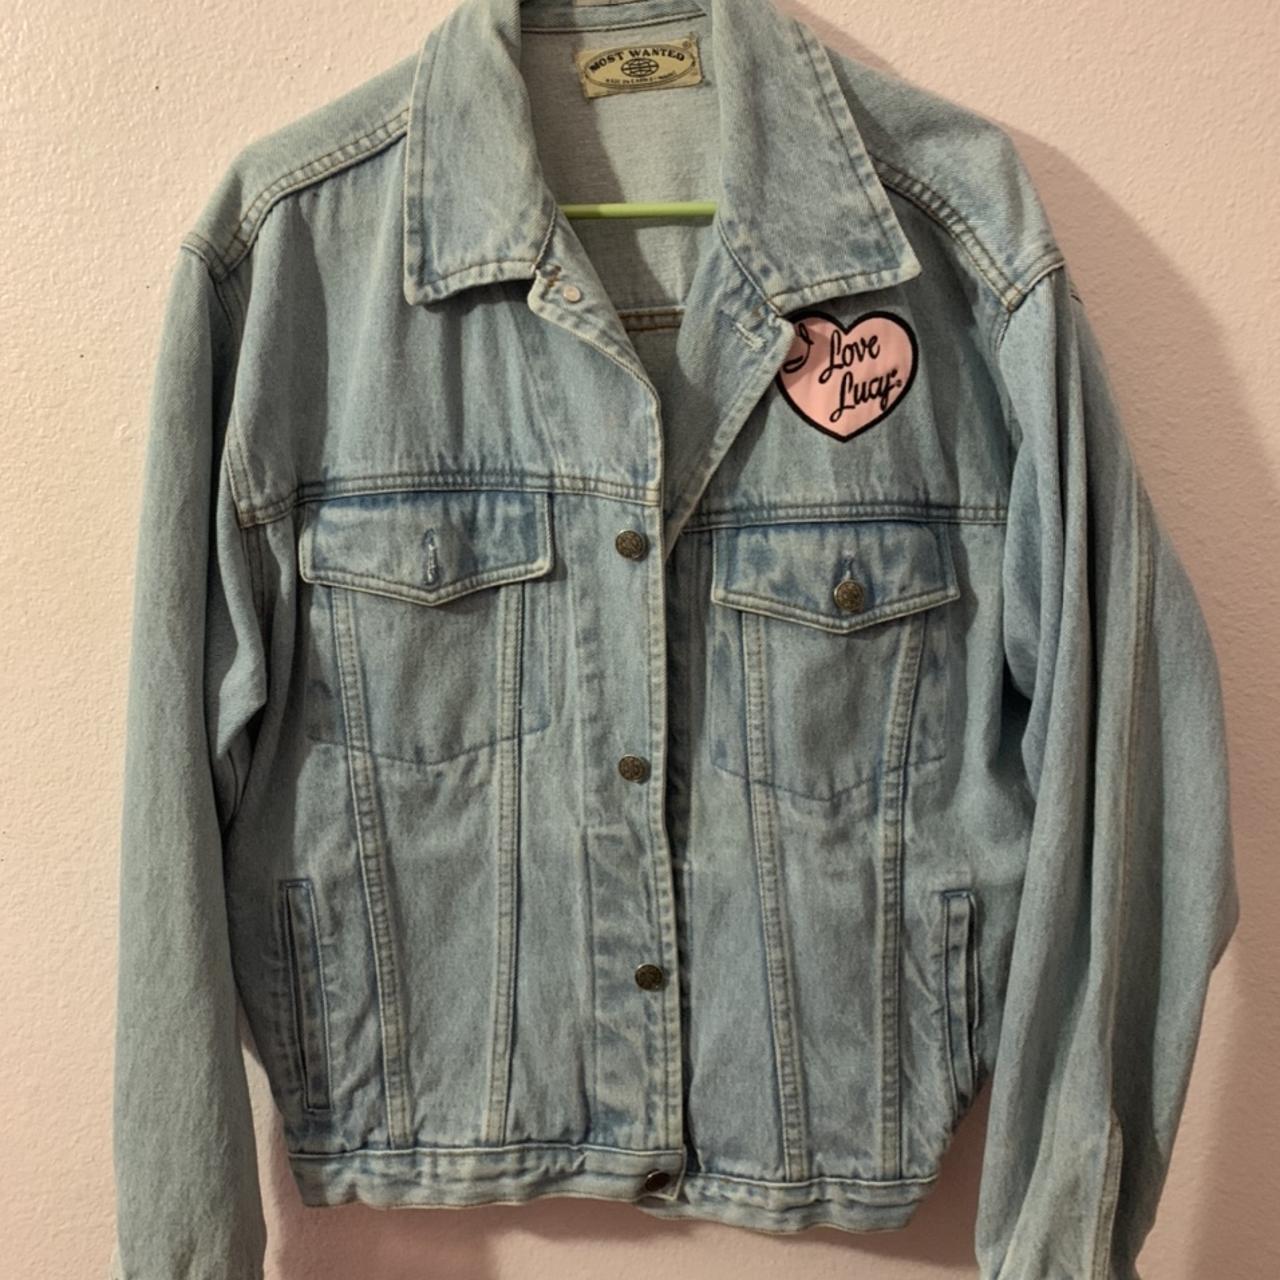 I love Lucy jacket authentic size M in men’s worn... - Depop